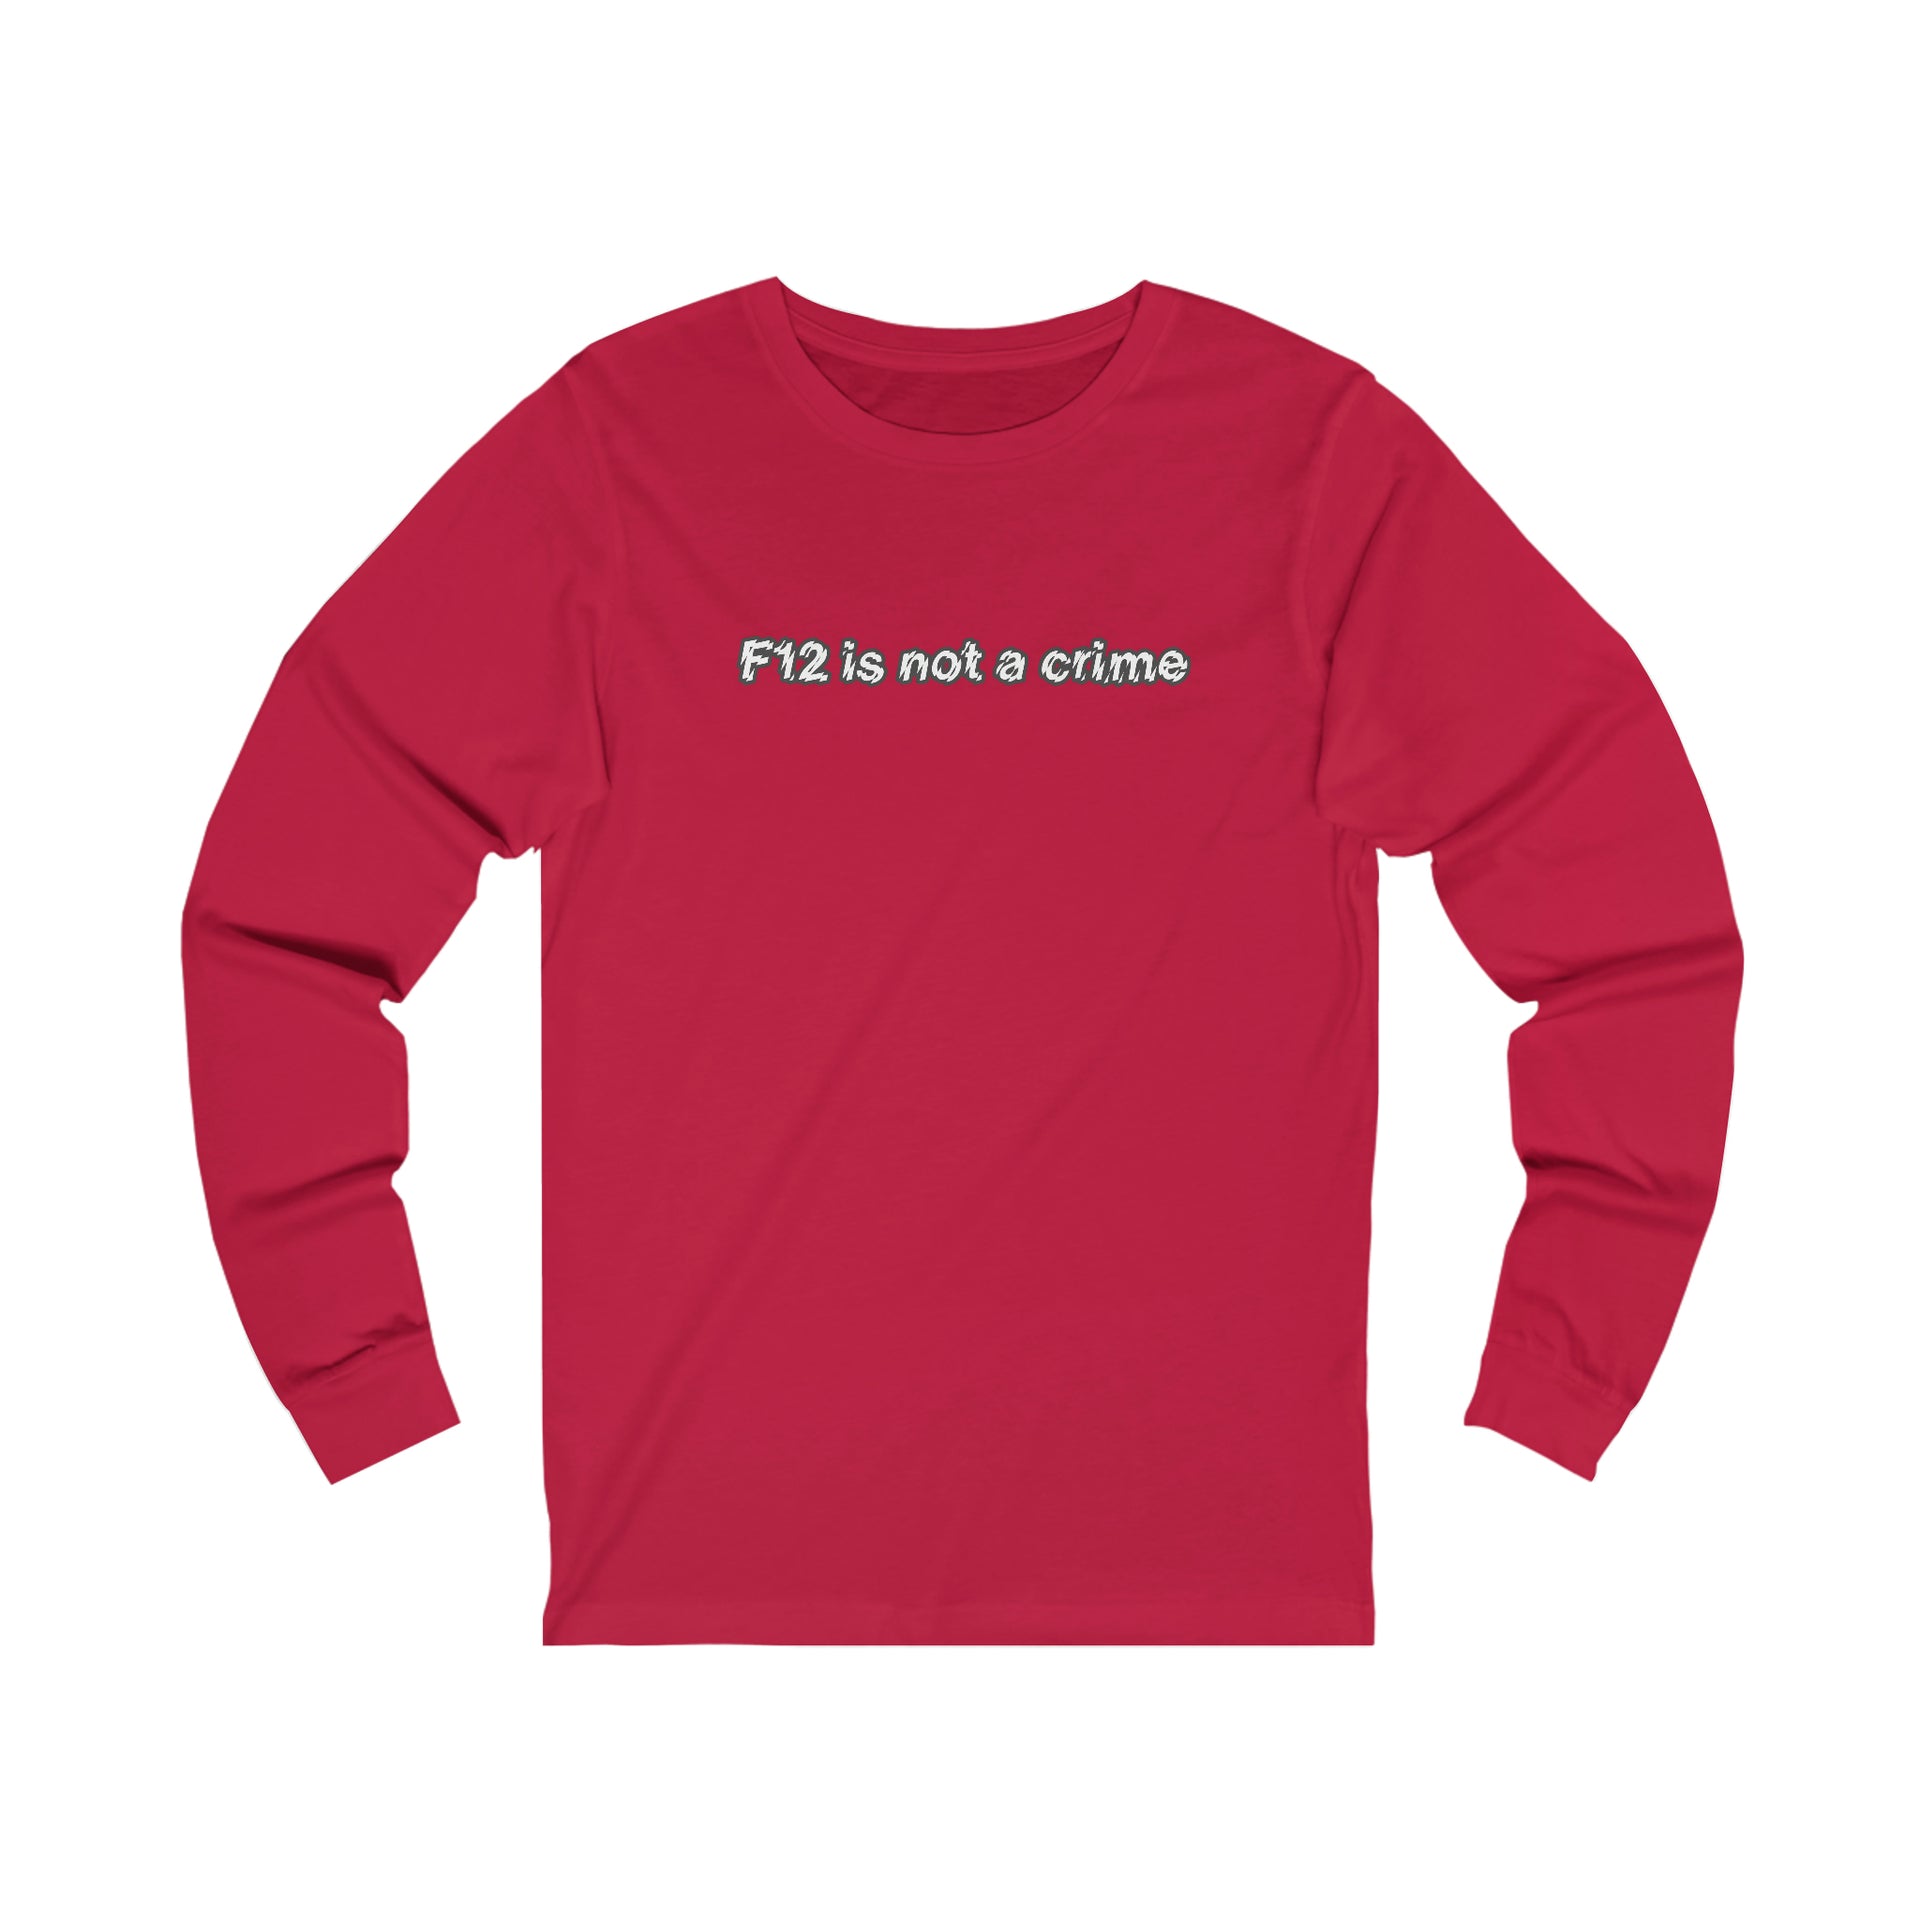 F12 is not a crime Unisex Long Sleeve Tee